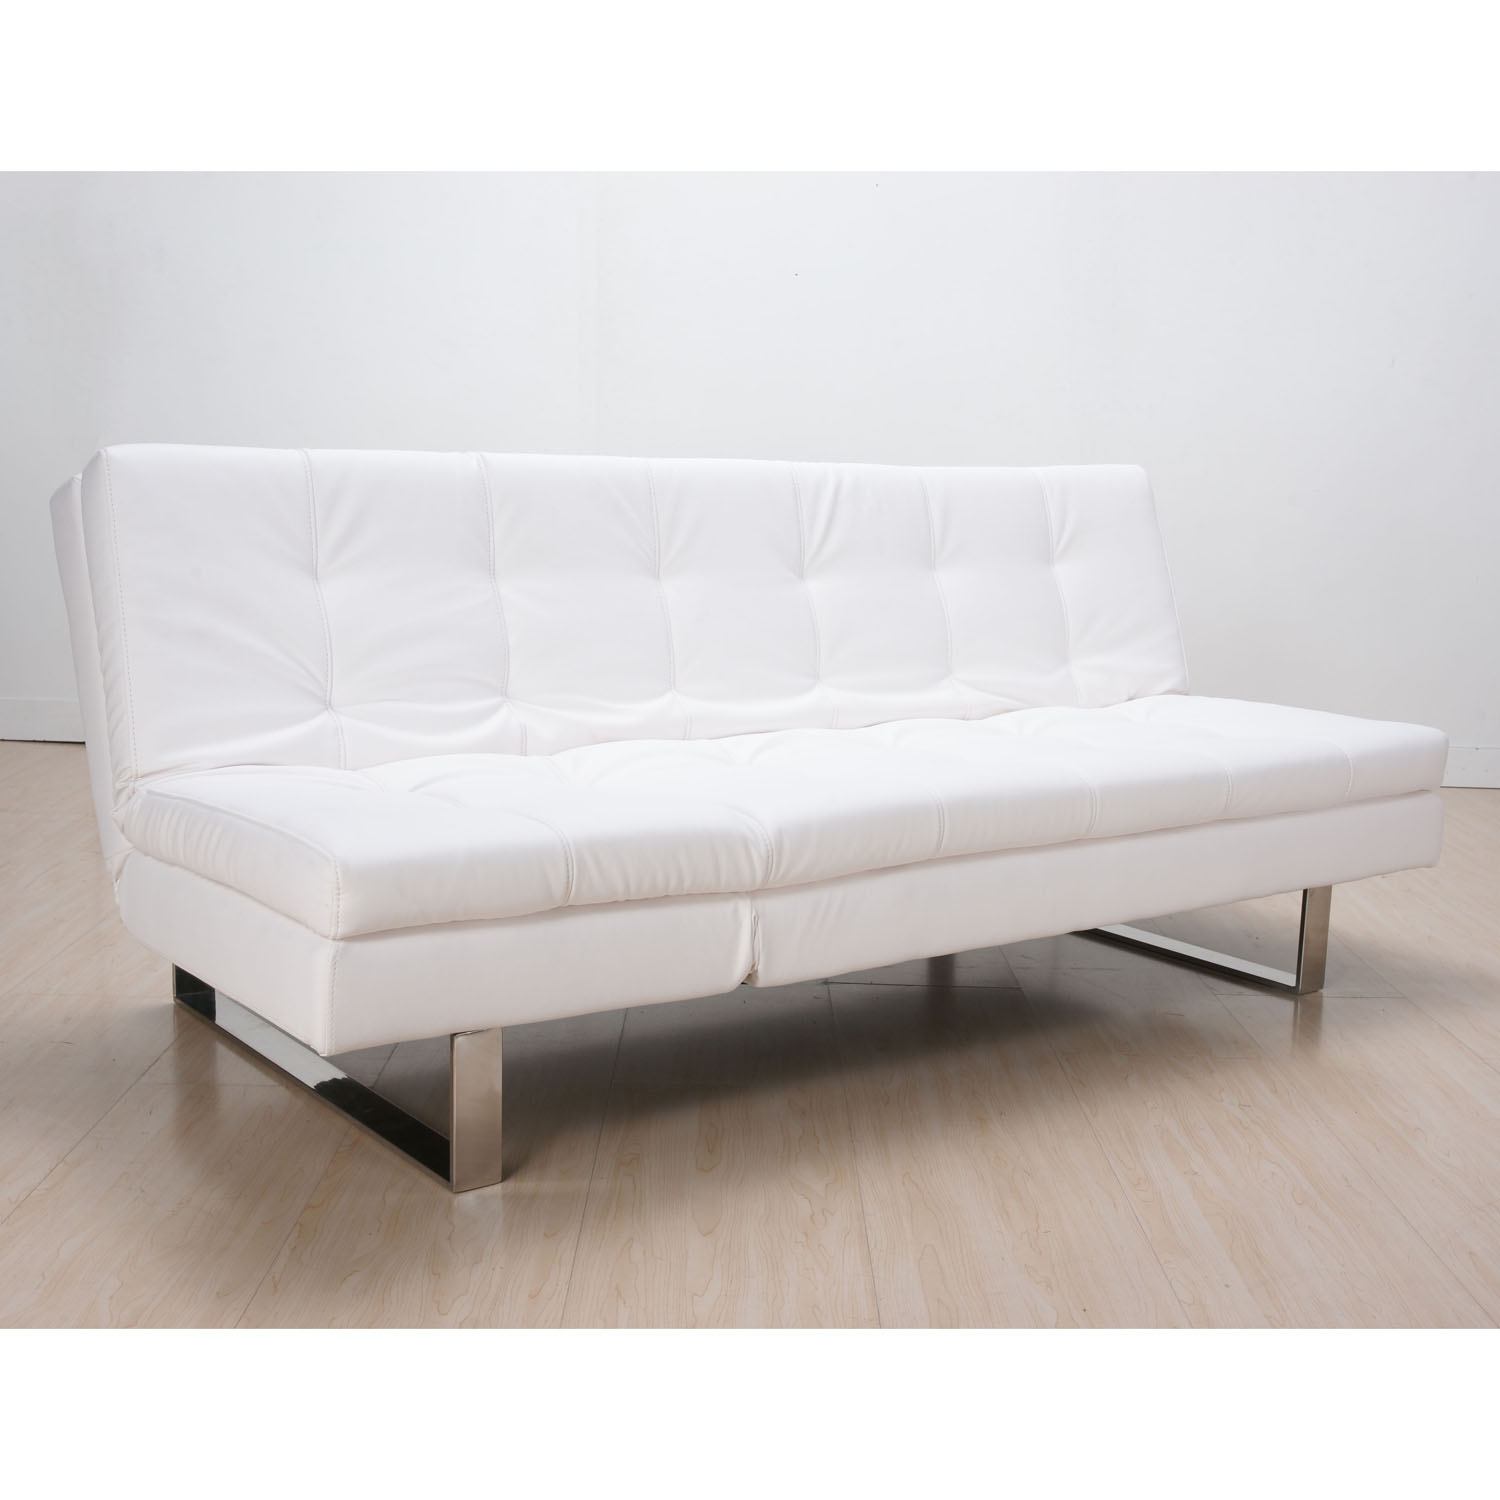 white sofa beds white sofa bed easy sofa bed white on sofa beds white jtywhty KCISCHE